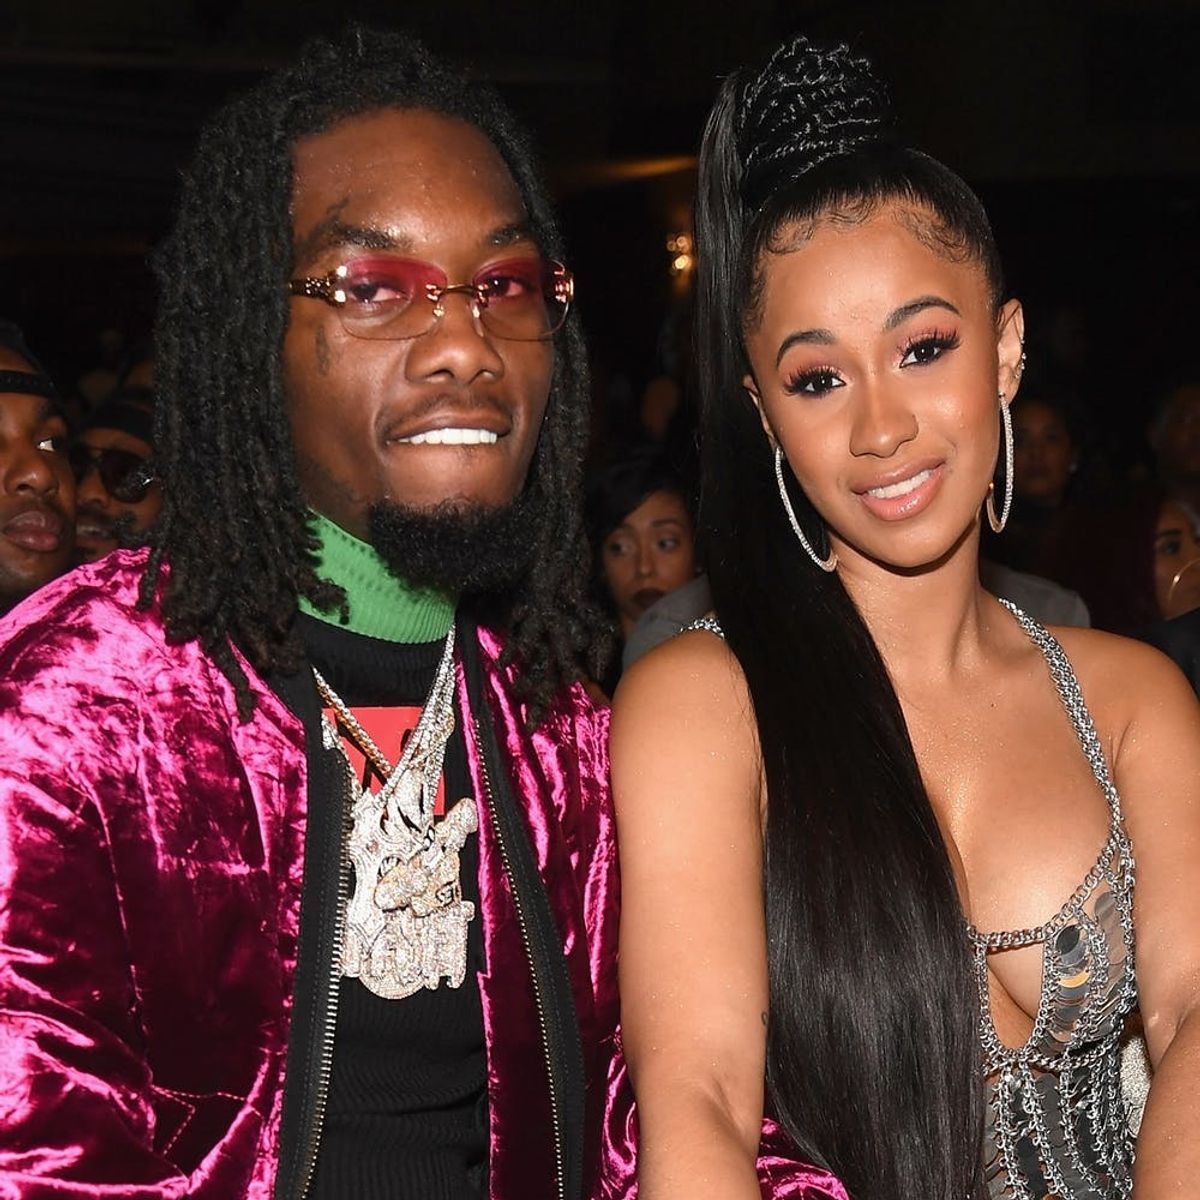 Rapper Cardi B and Offset of Migos Just Got Engaged Onstage!